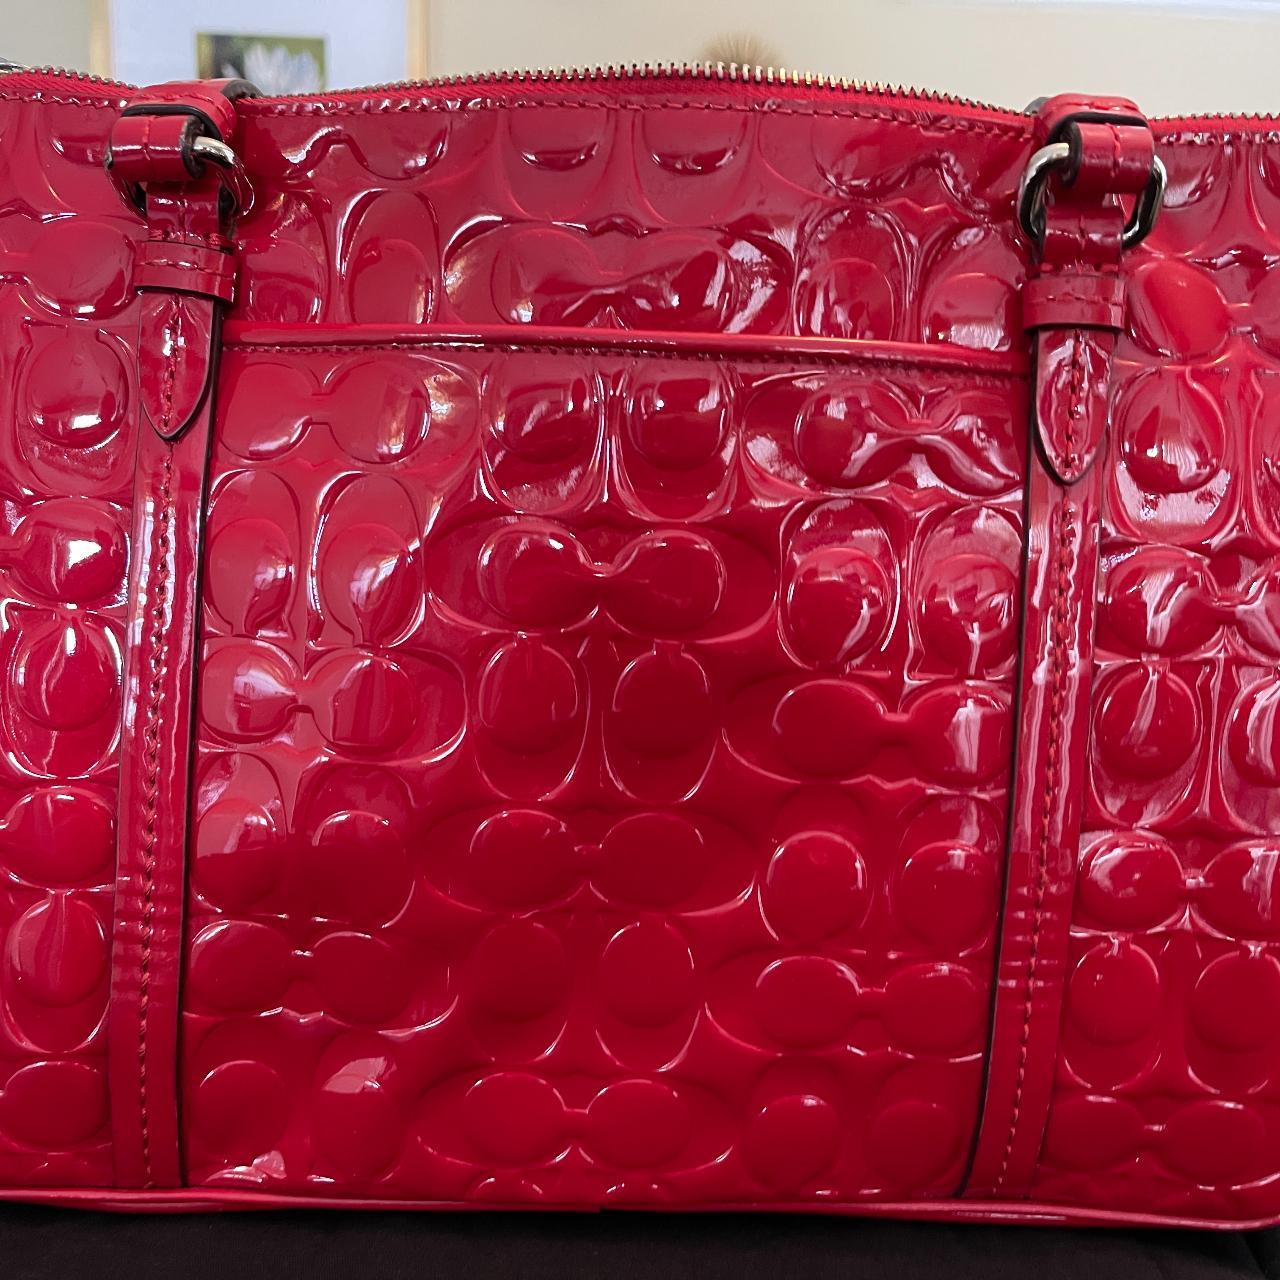 LIKE NEW Vintage Coach Kisslock Change Purse 6903 Red - Etsy